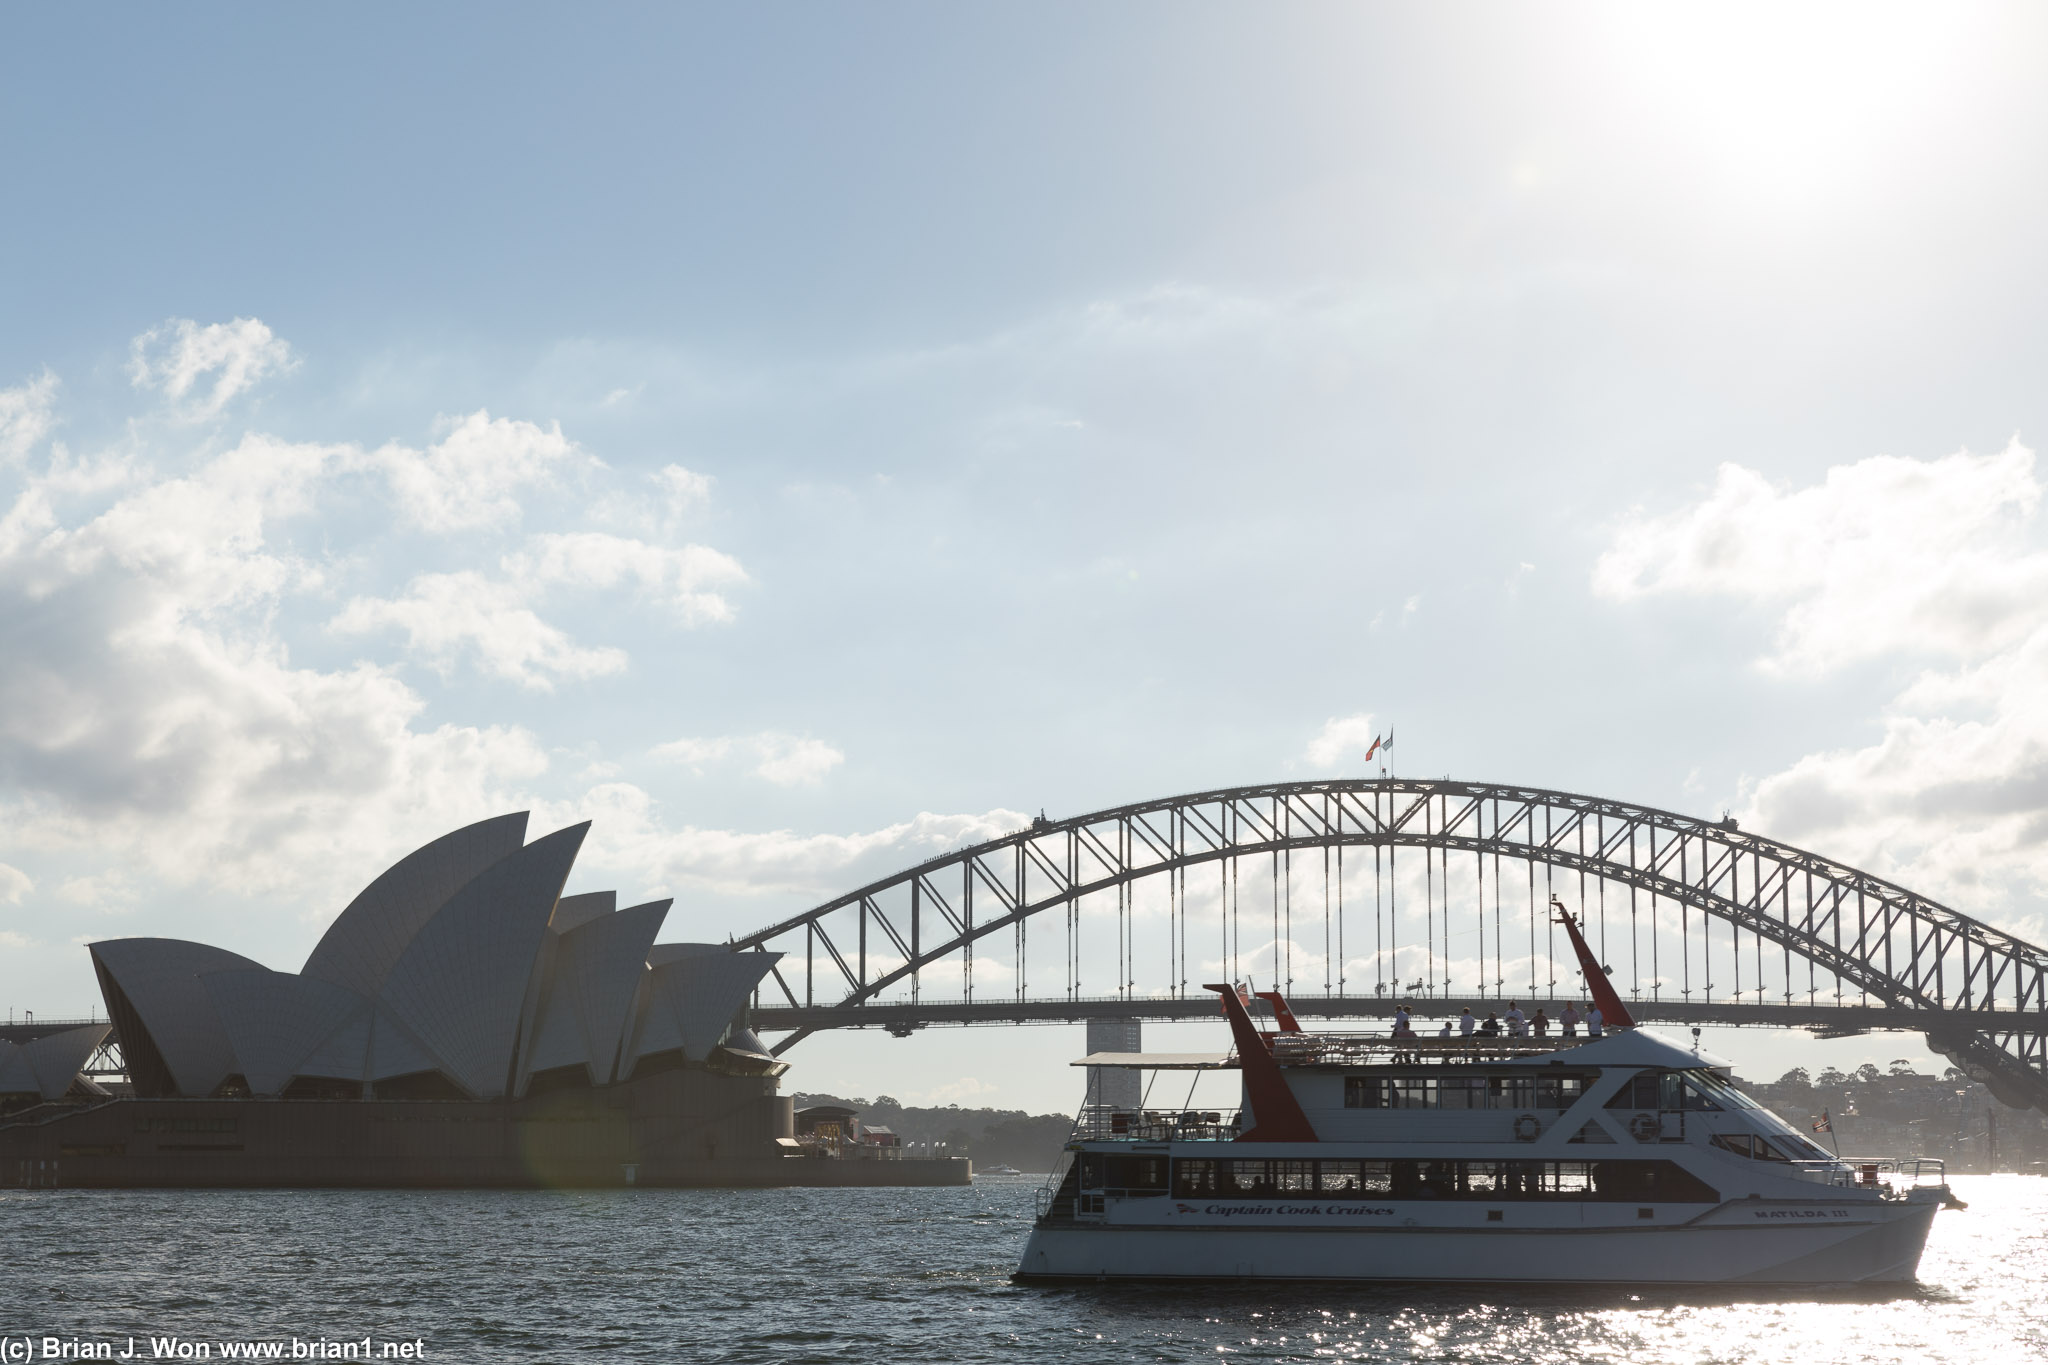 Sydney Opera House and Sydney Harbour Bridge, with a harbour cruise in the foreground.